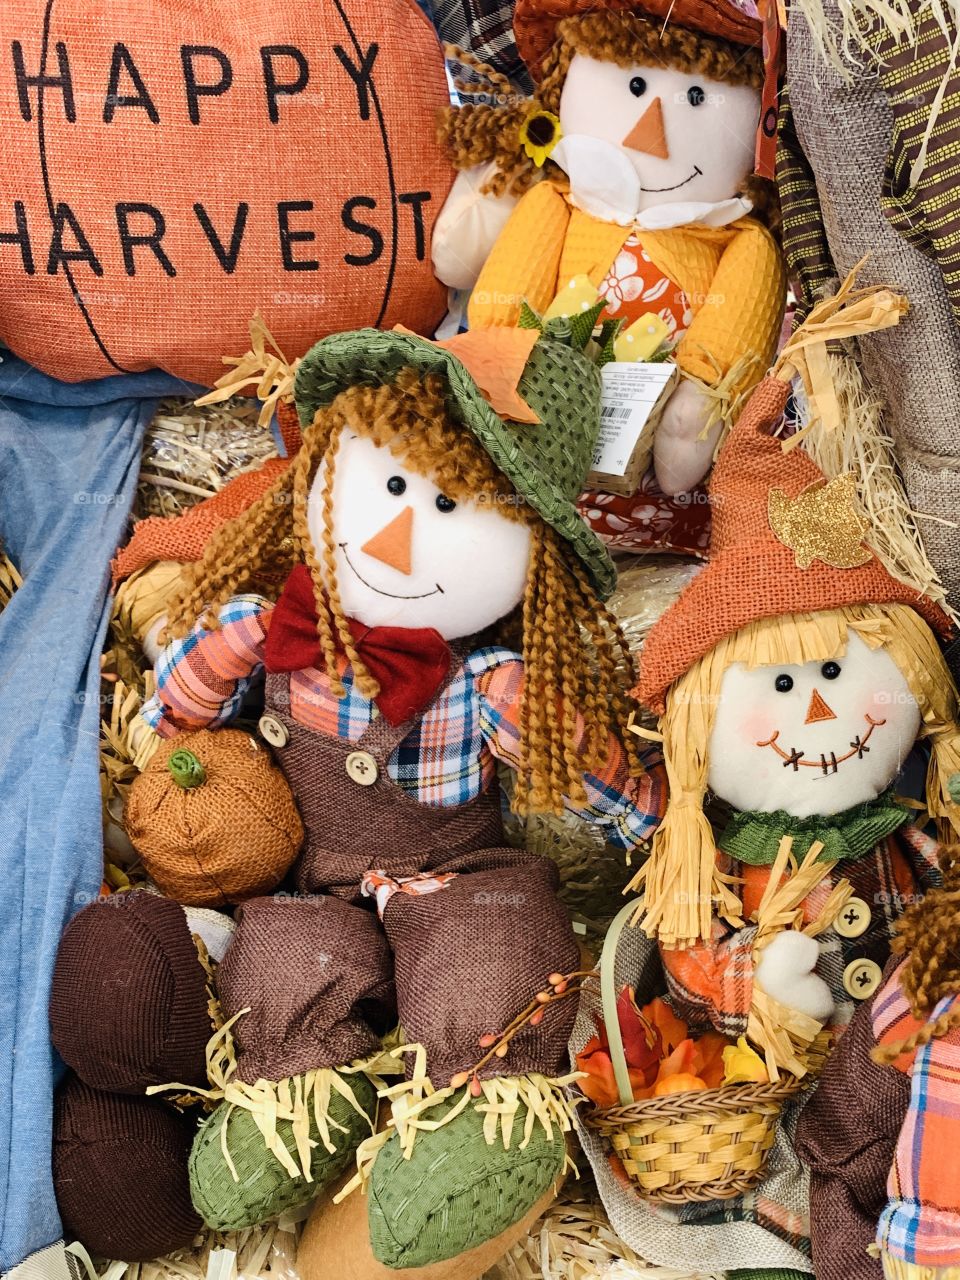 Three cute scarecrow dolls in autumn harvest display with “happy harvest” lettered greeting on a pumpkin